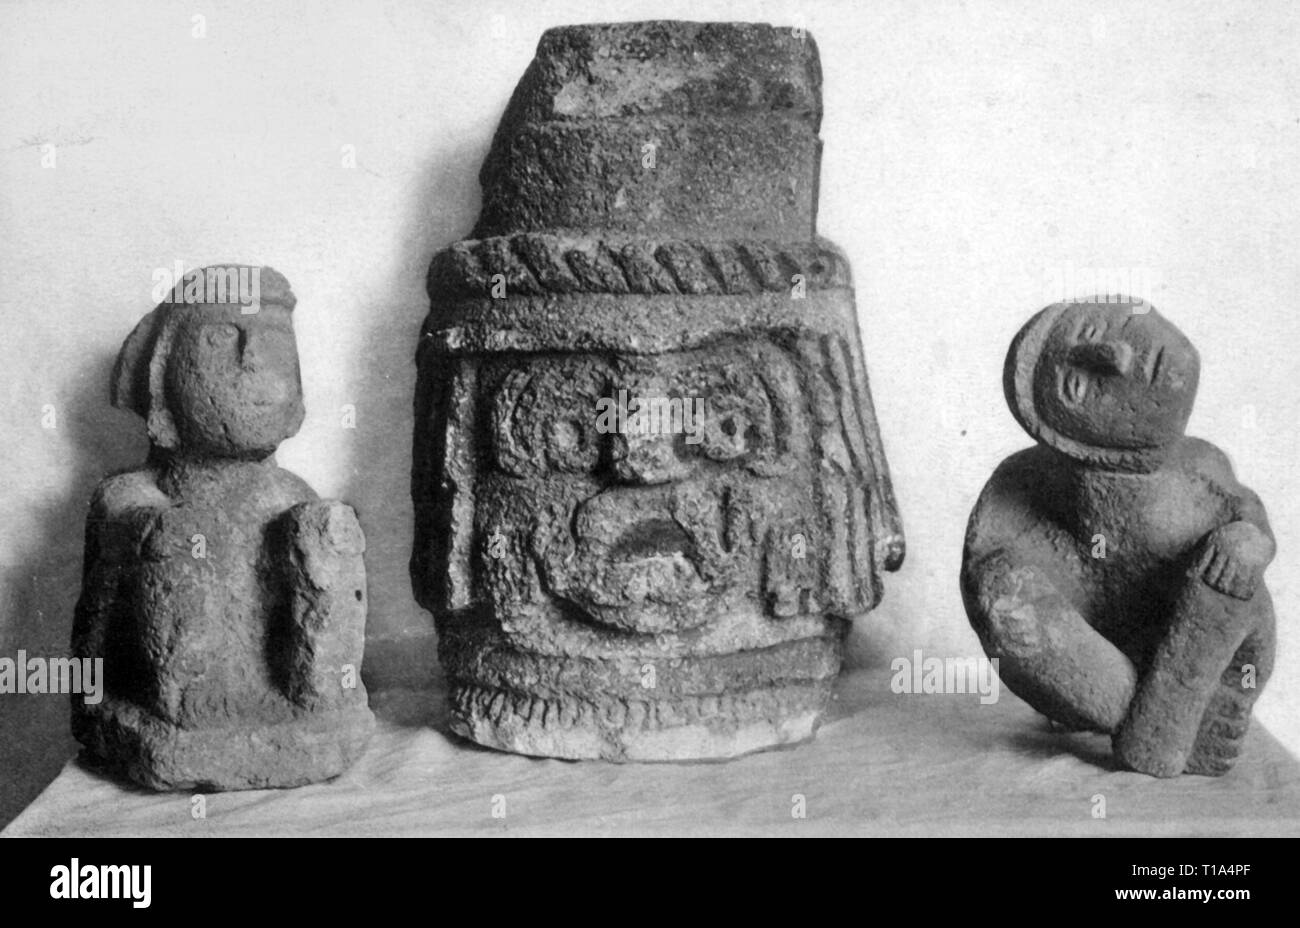 religion, natural religions, Kukulkan, rain deity of the Maya, sculpture, stone, Royal Ethnographical Museum, Munich, Artist's Copyright has not to be cleared Stock Photo